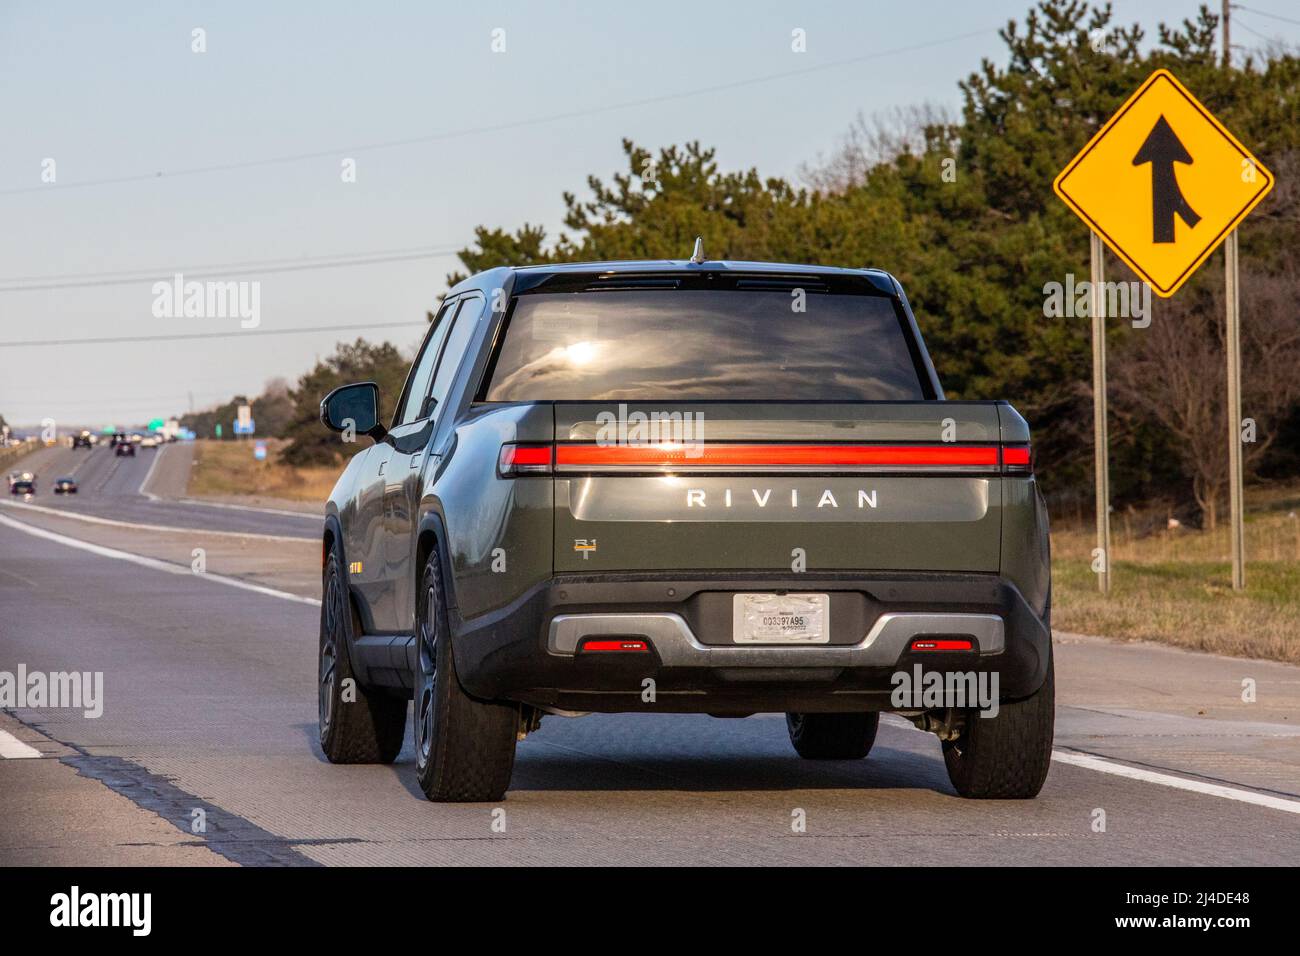 Rivian Truck, R1T, EV, Electric Vehicle on the highway in Michigan, USA Stock Photo